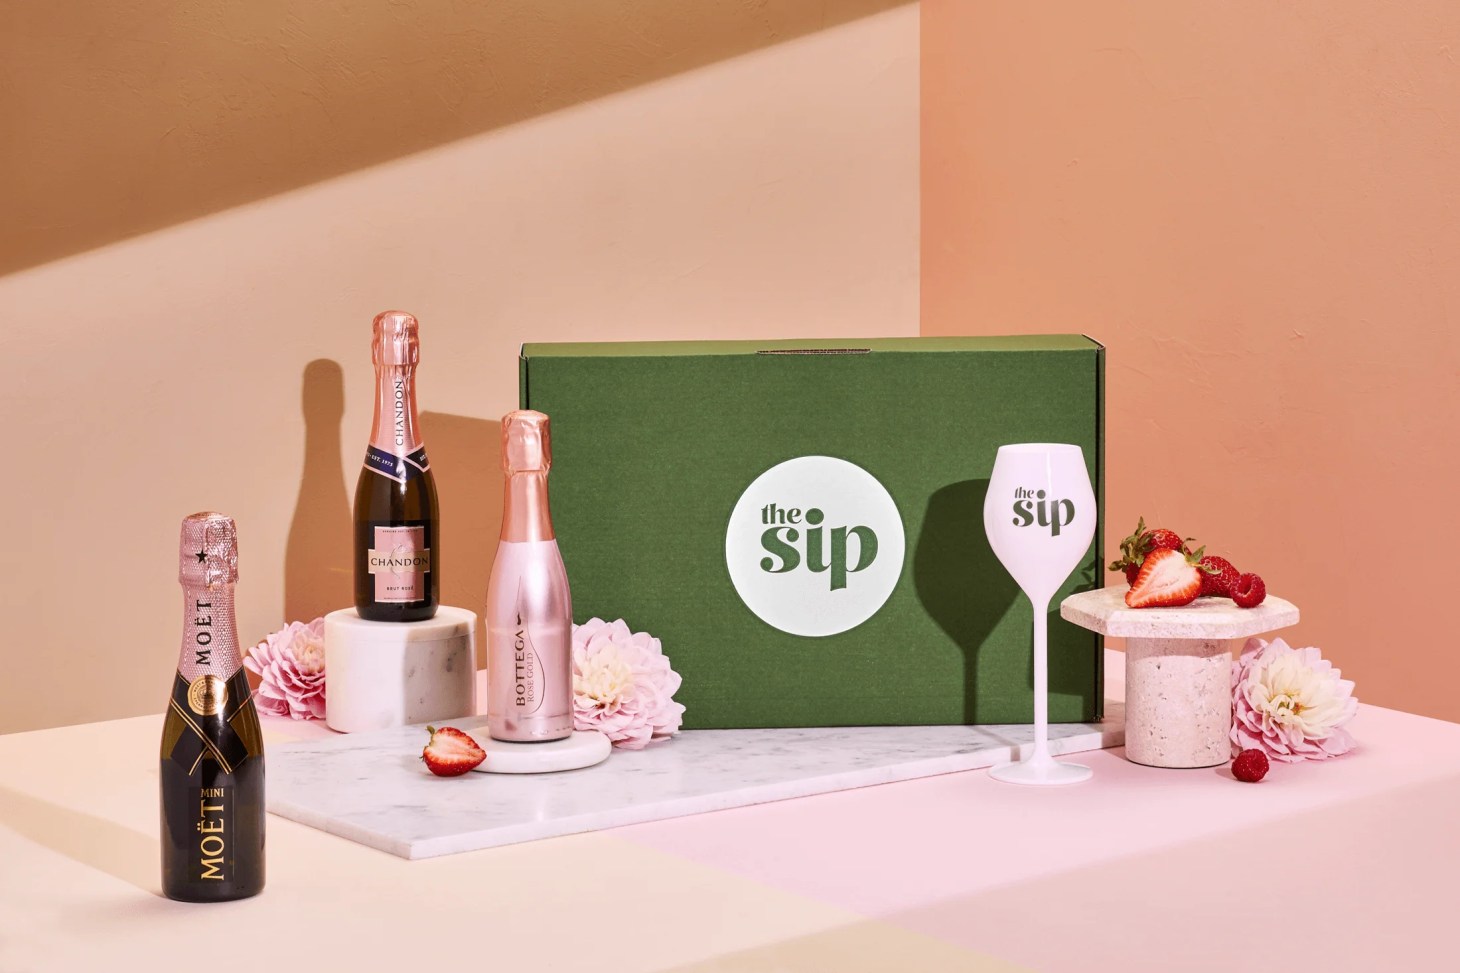 the sip rose all day box, mother's day food gifts